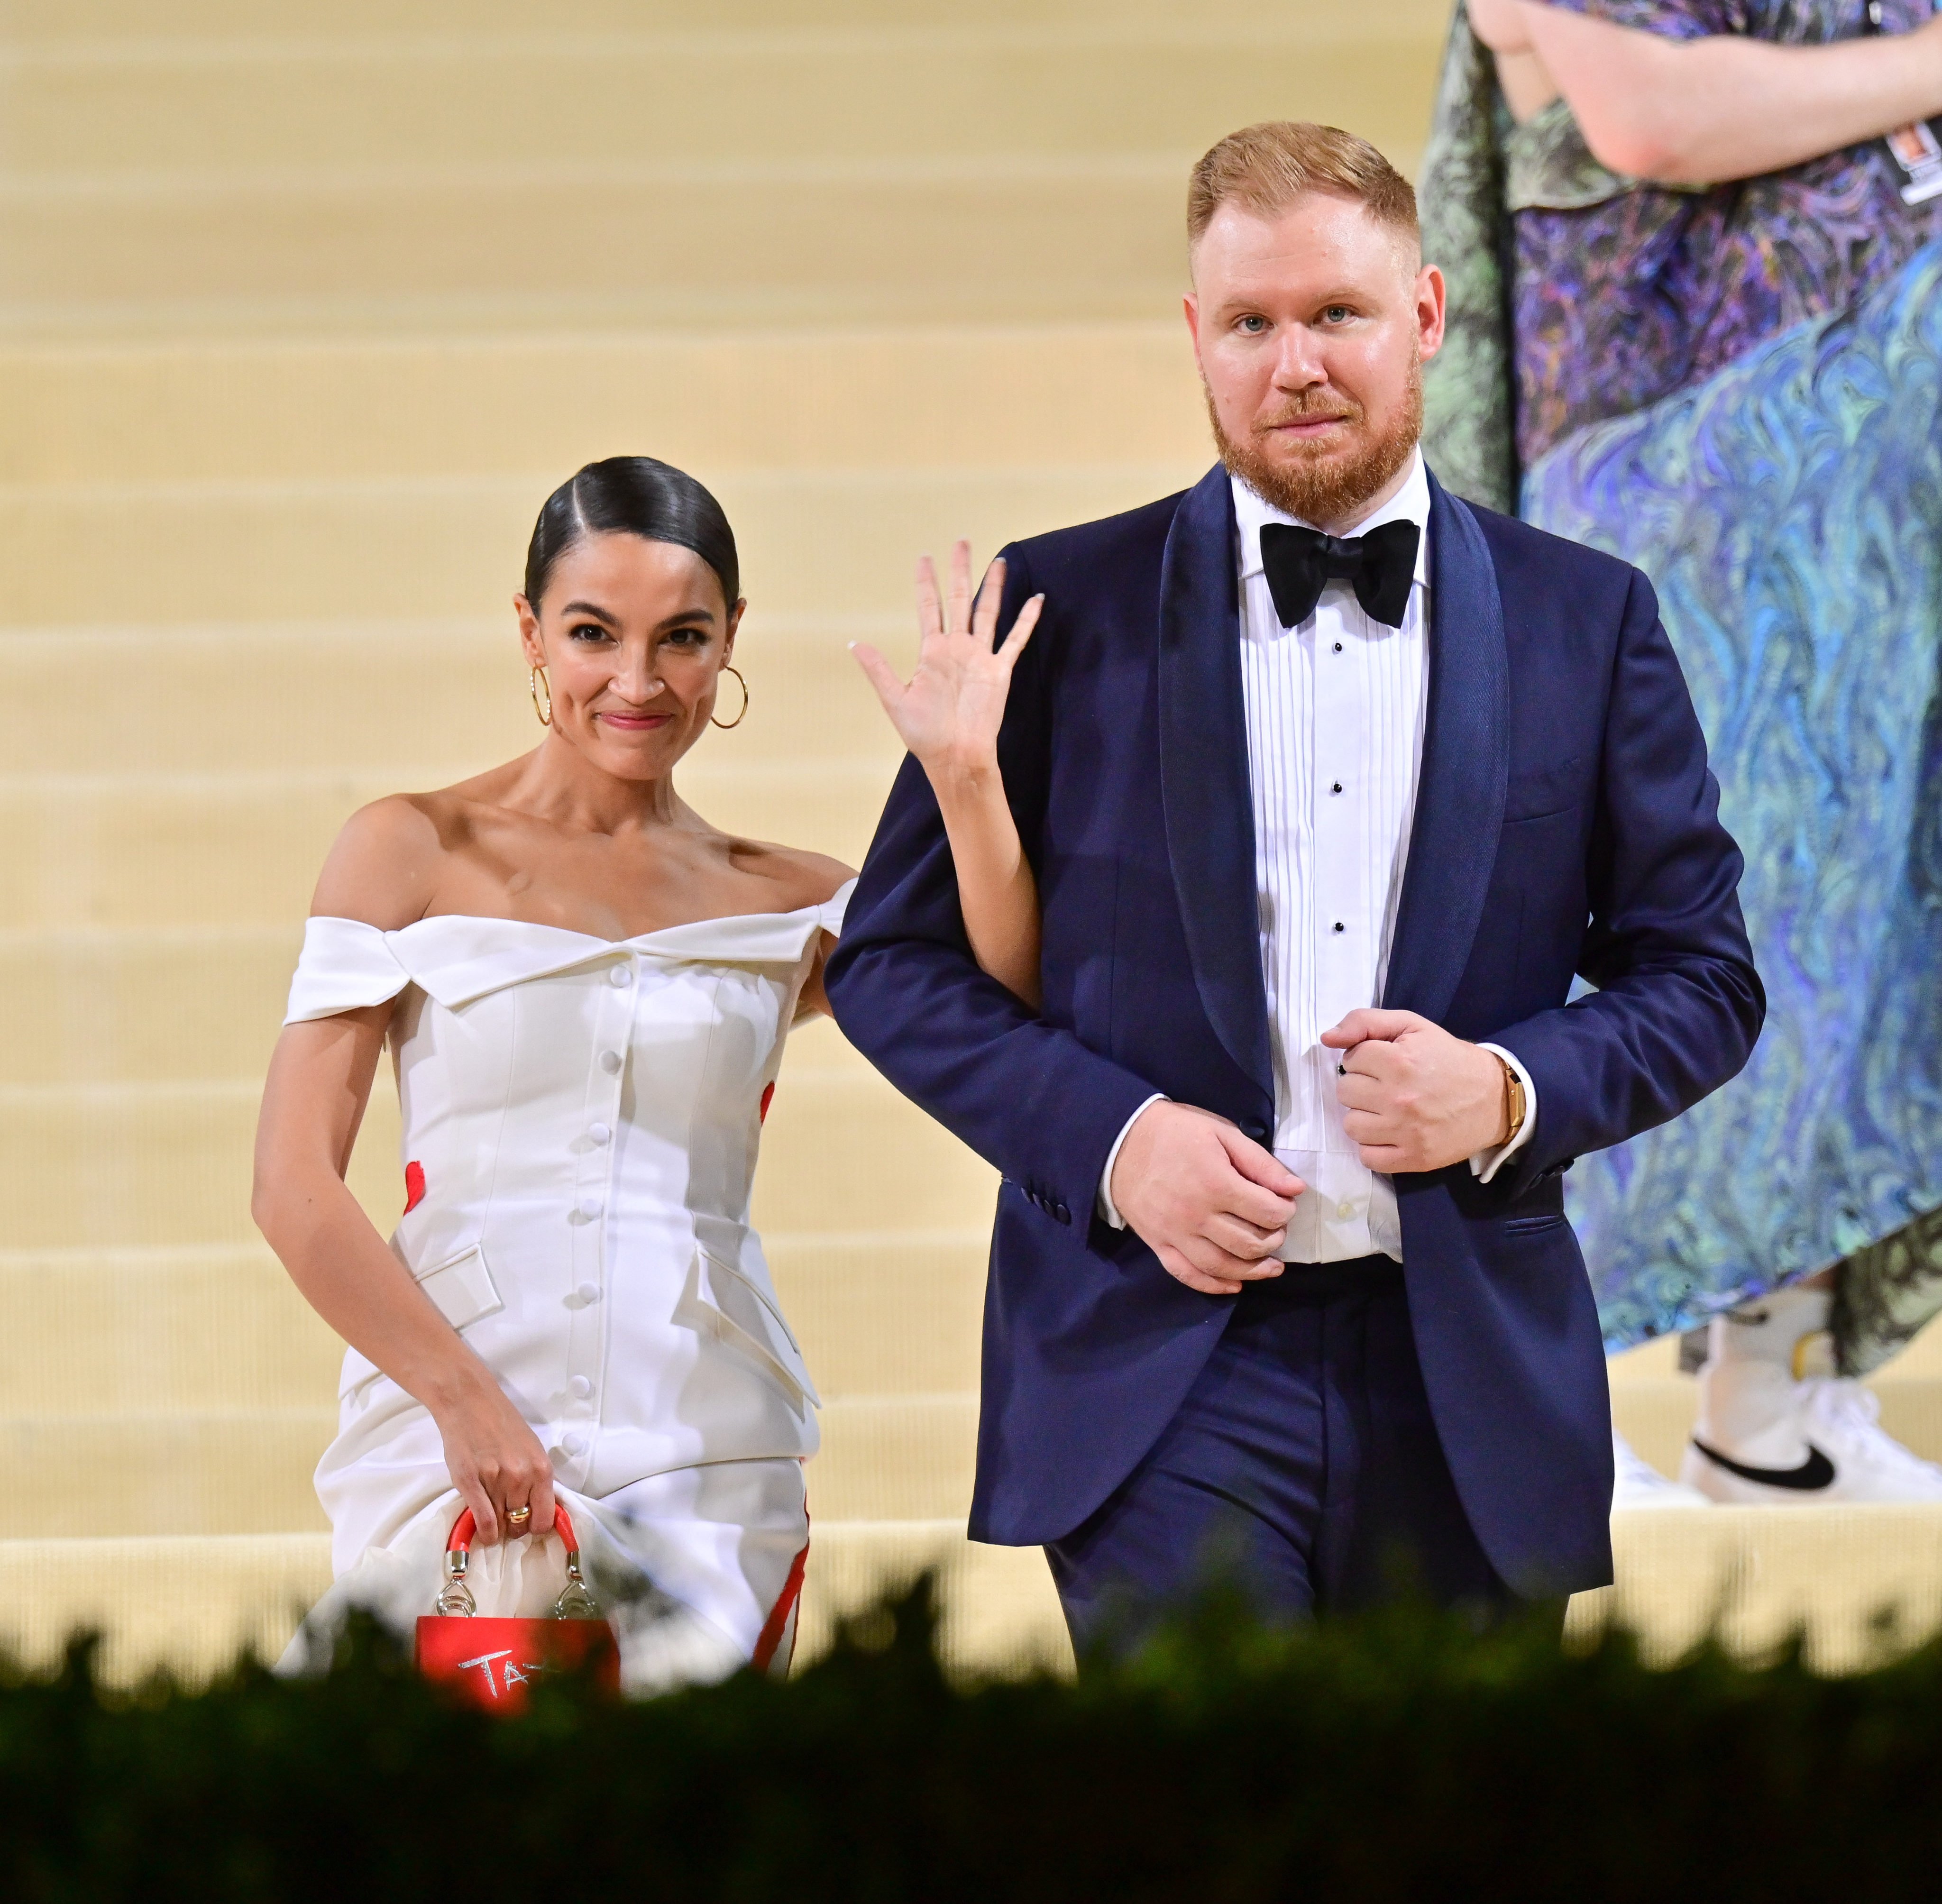 Alexandria Ocasio-Cortez and Riley Roberts leave after the 2021 Met Gala. Photo: Getty Images